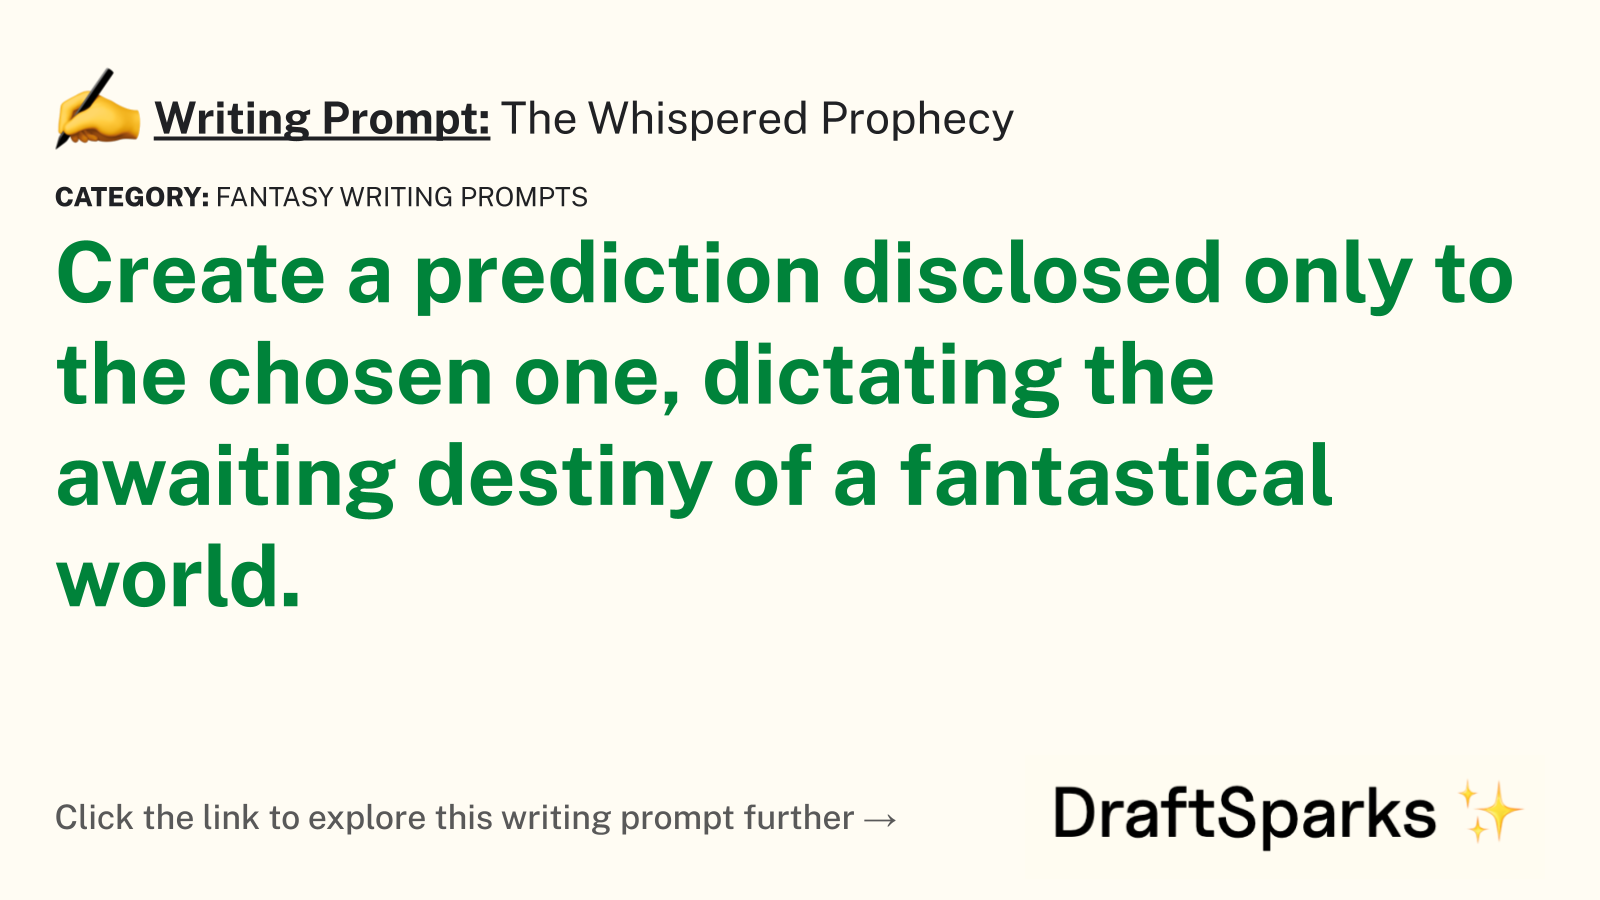 The Whispered Prophecy